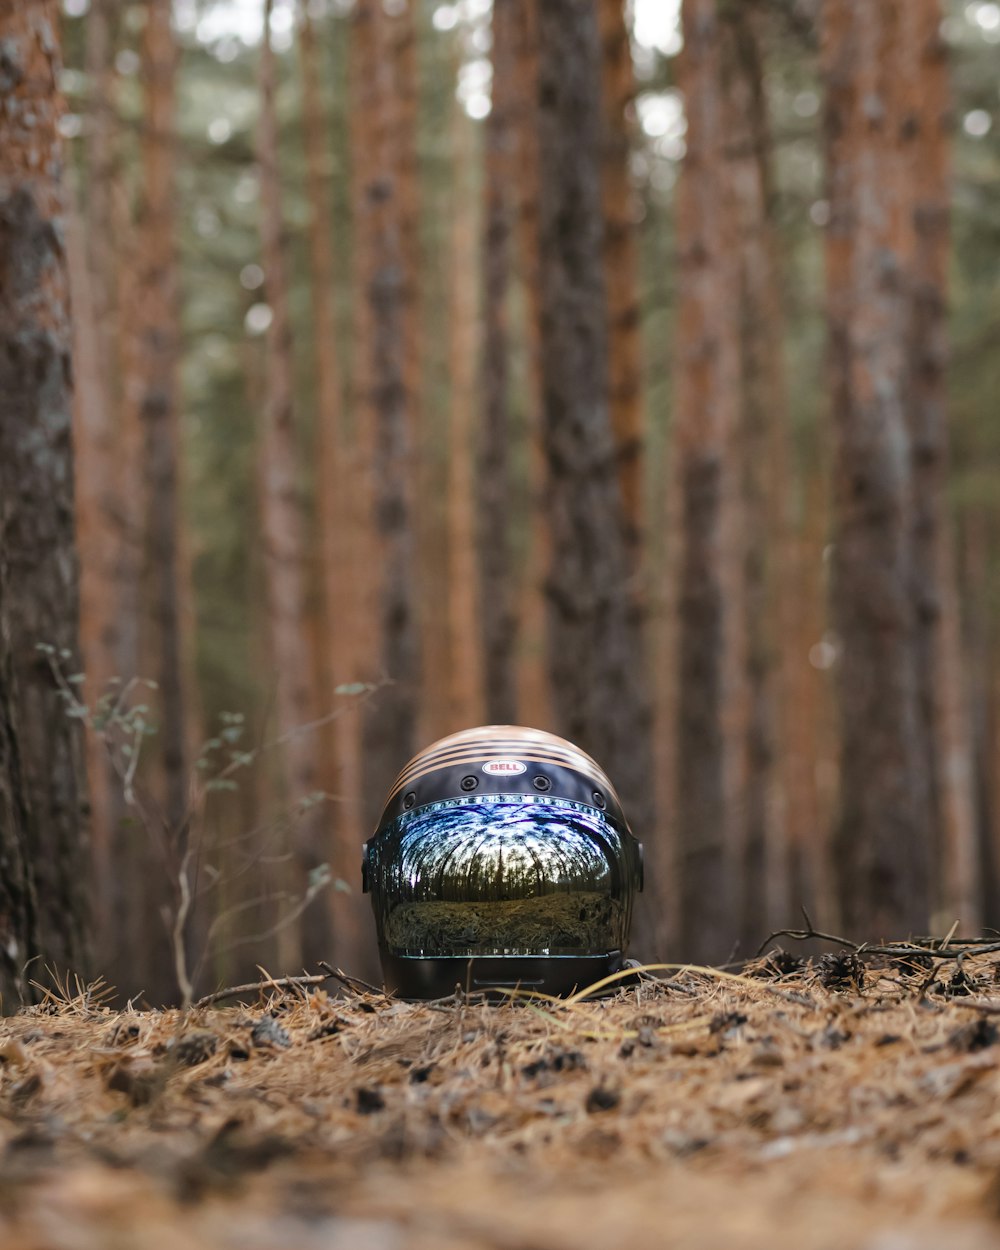 selective focus photography of a helmet on dirt in the forest